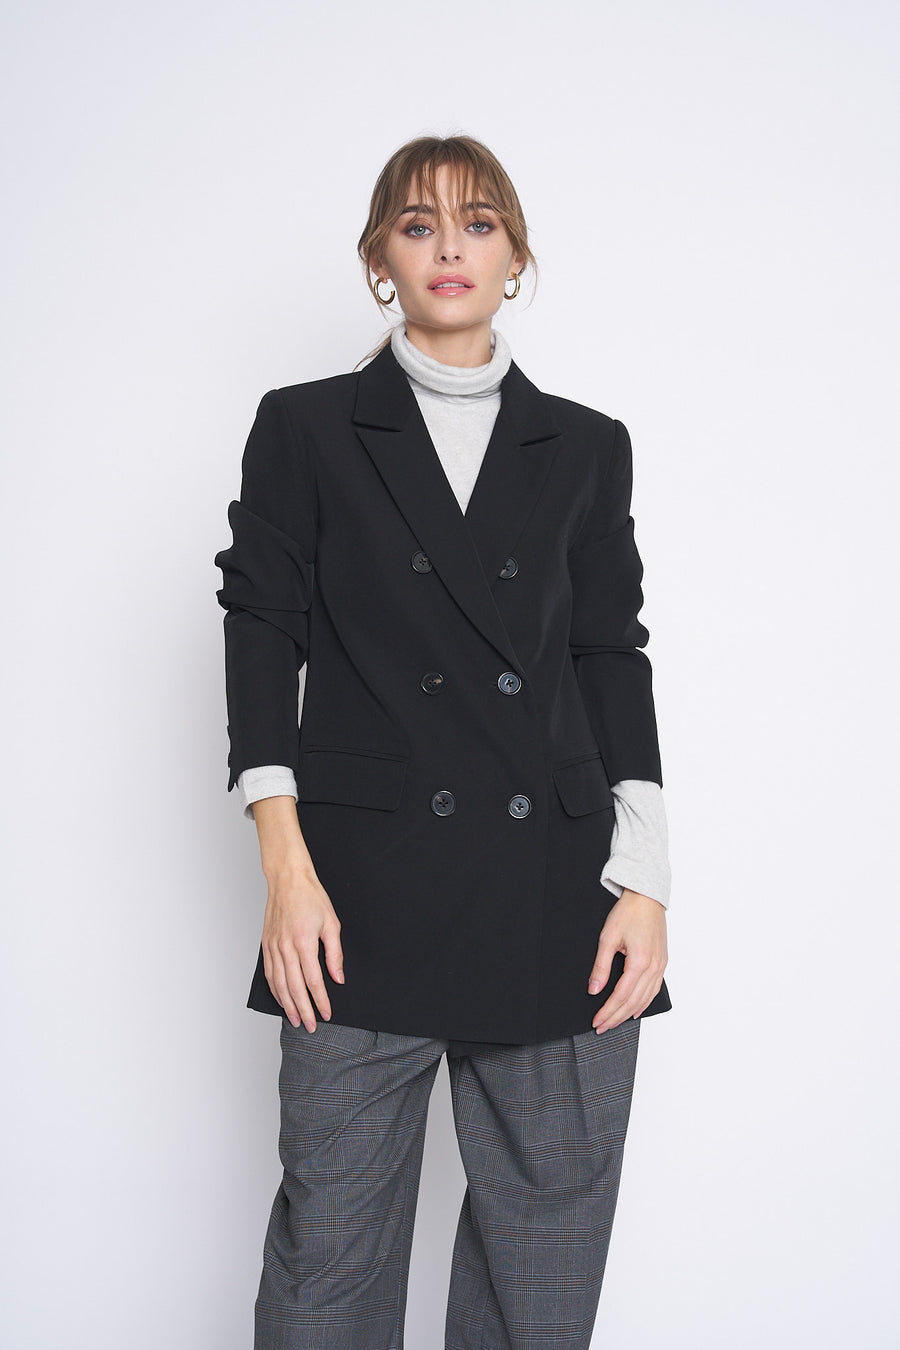 No Srcipt image - Images of 8 of 10 Double Breasted Staple Jacket Women's Workwear Office Wear Women's Fashion Sophisticated Style Chic Simple Classic Black Blazer Fall Jacket Fall Fashion Women's Outerwear Timeless Everyday Blazer Neutral Color The Emory Blazer In Black